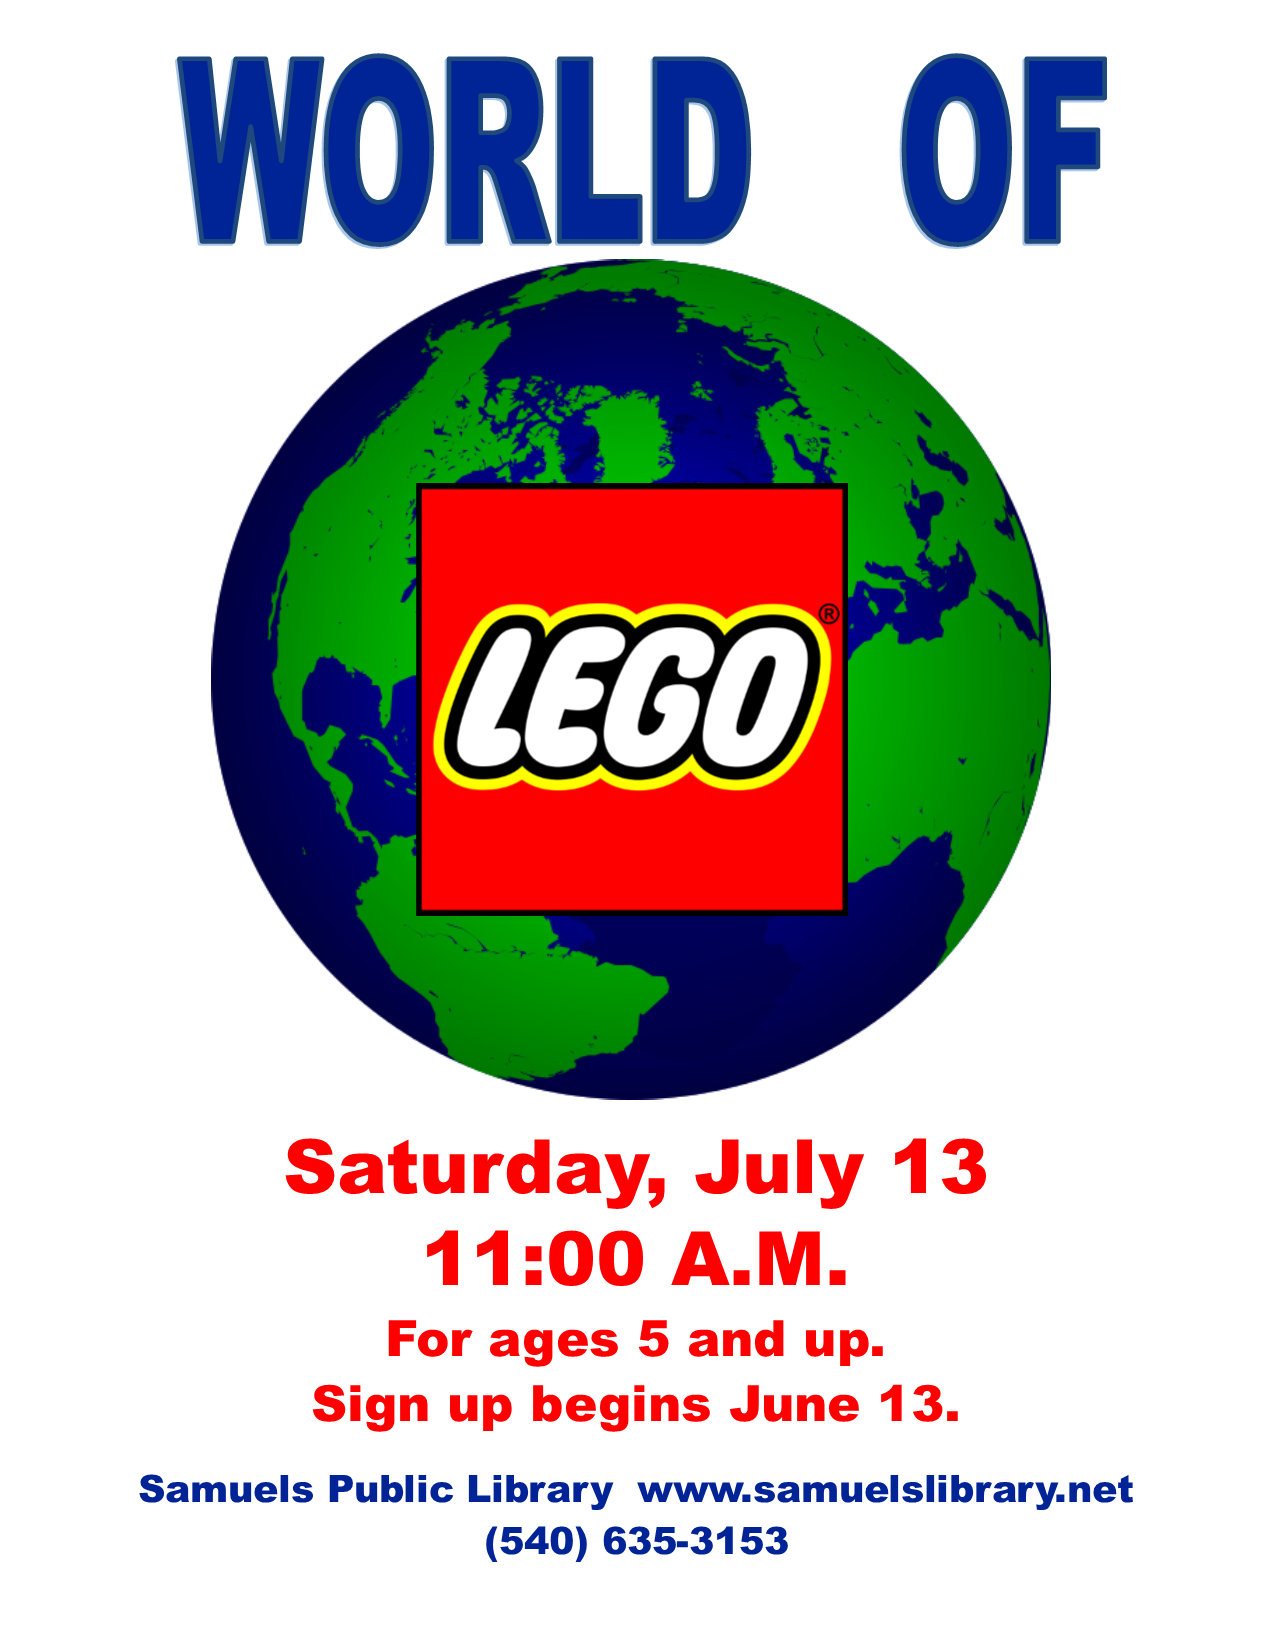 Lego fans!  Join us on Saturday, July 13, at 11:00 A.M.